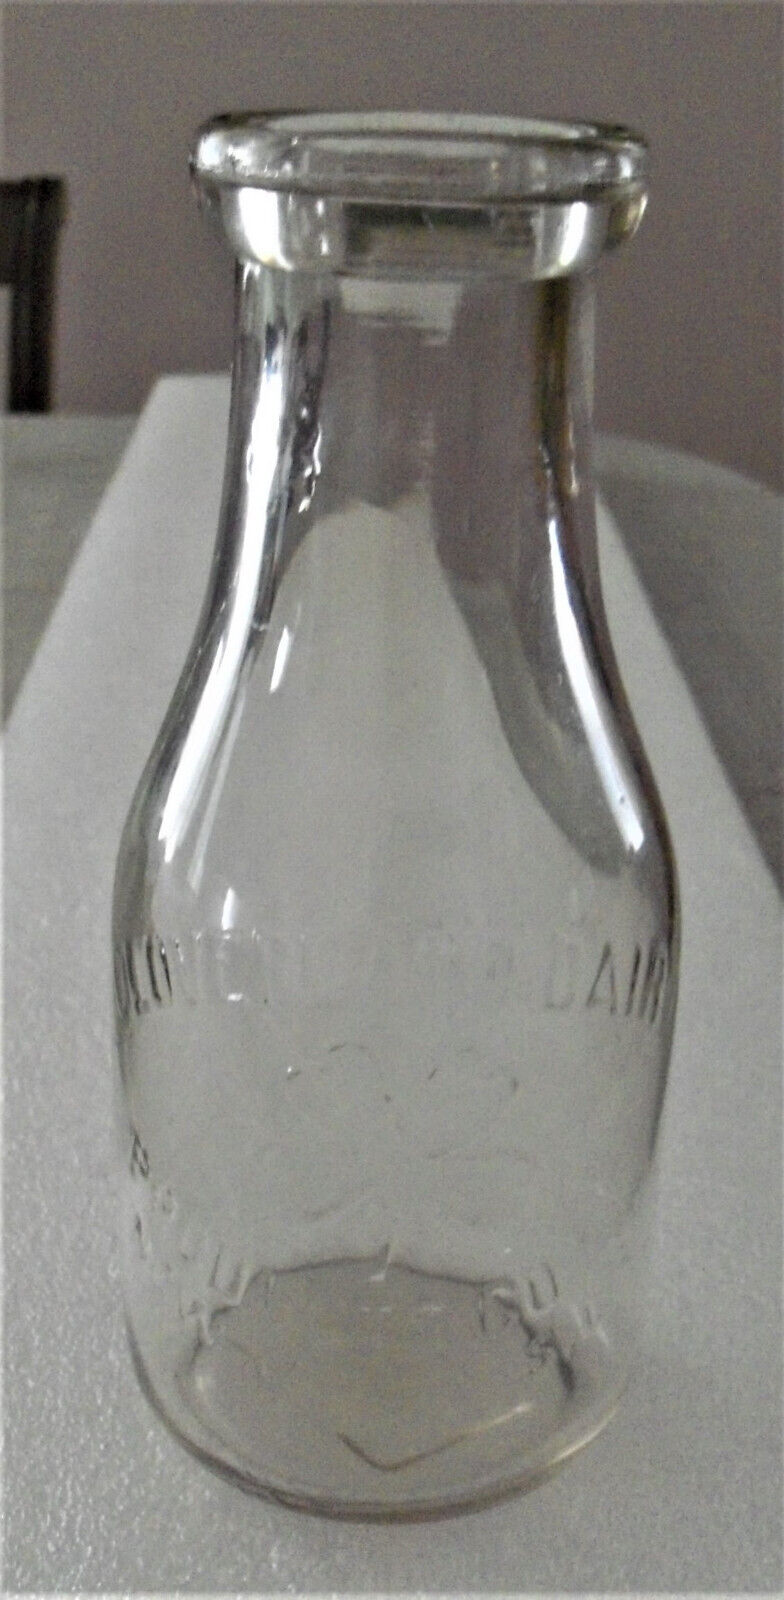 Cloverland Dairy Products Inc. New Orleans ONE PINT embossed vintage milk bottle